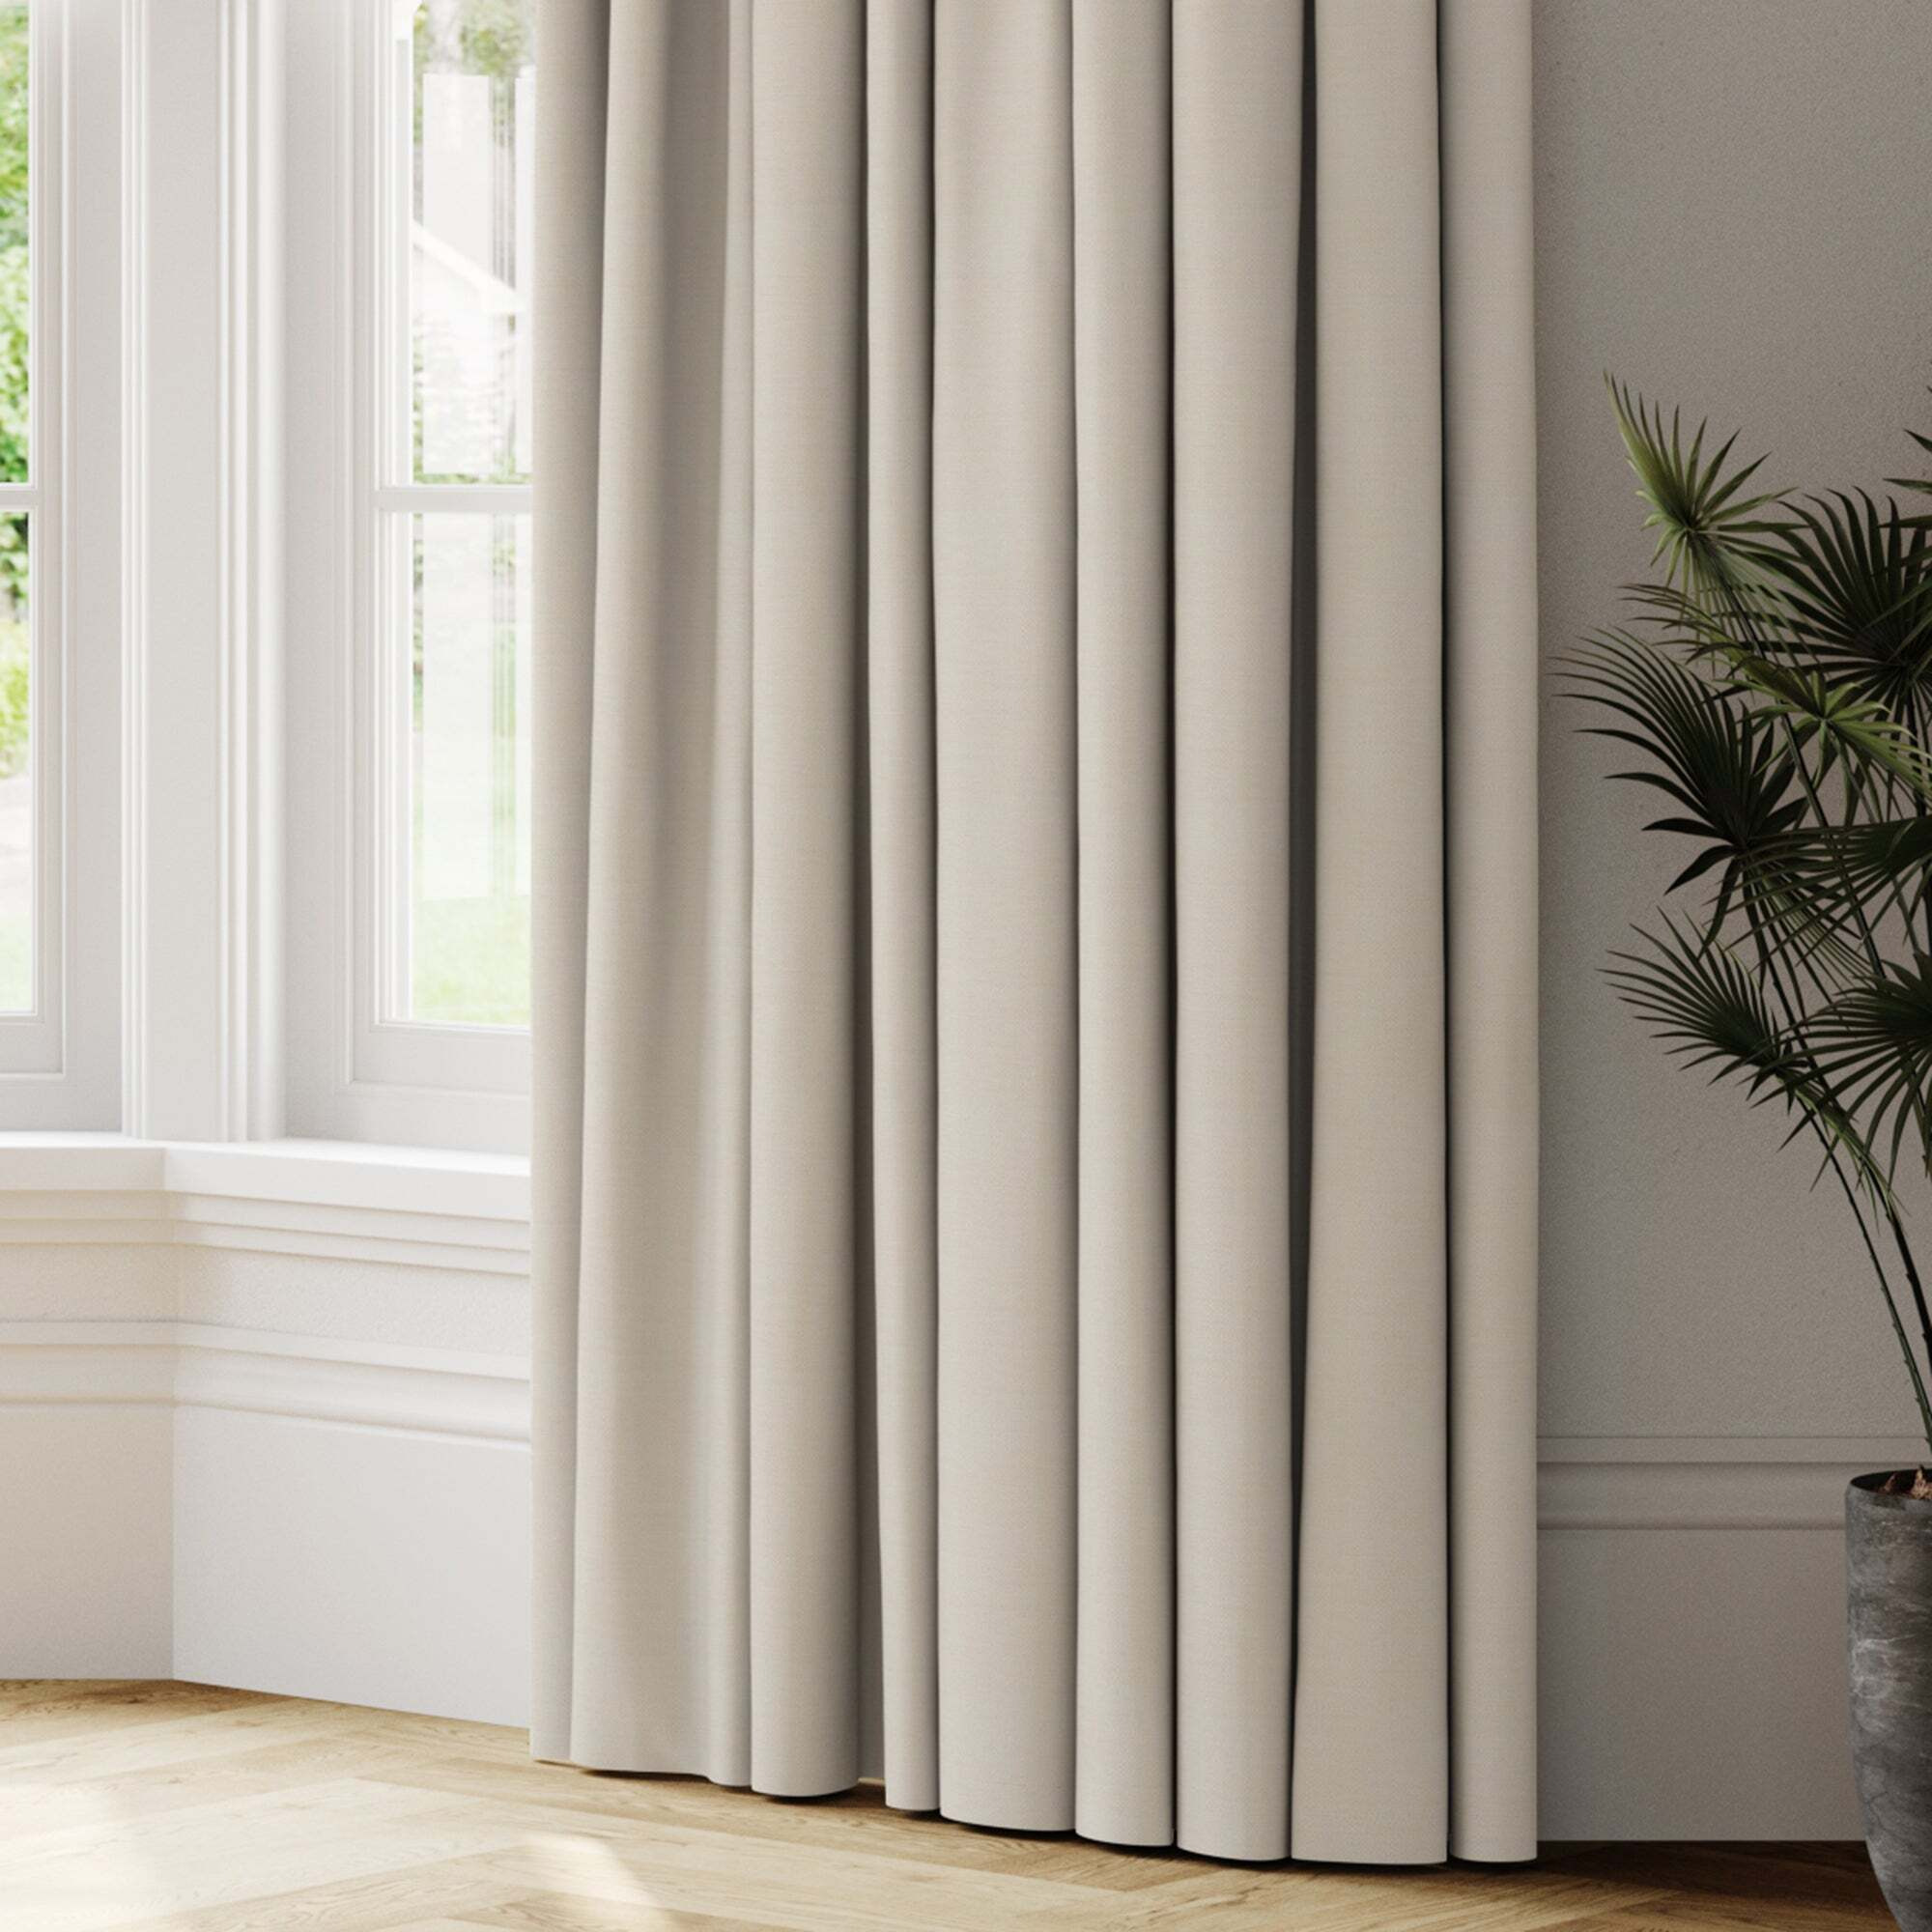 Covent Garden Made to Measure Curtains natural